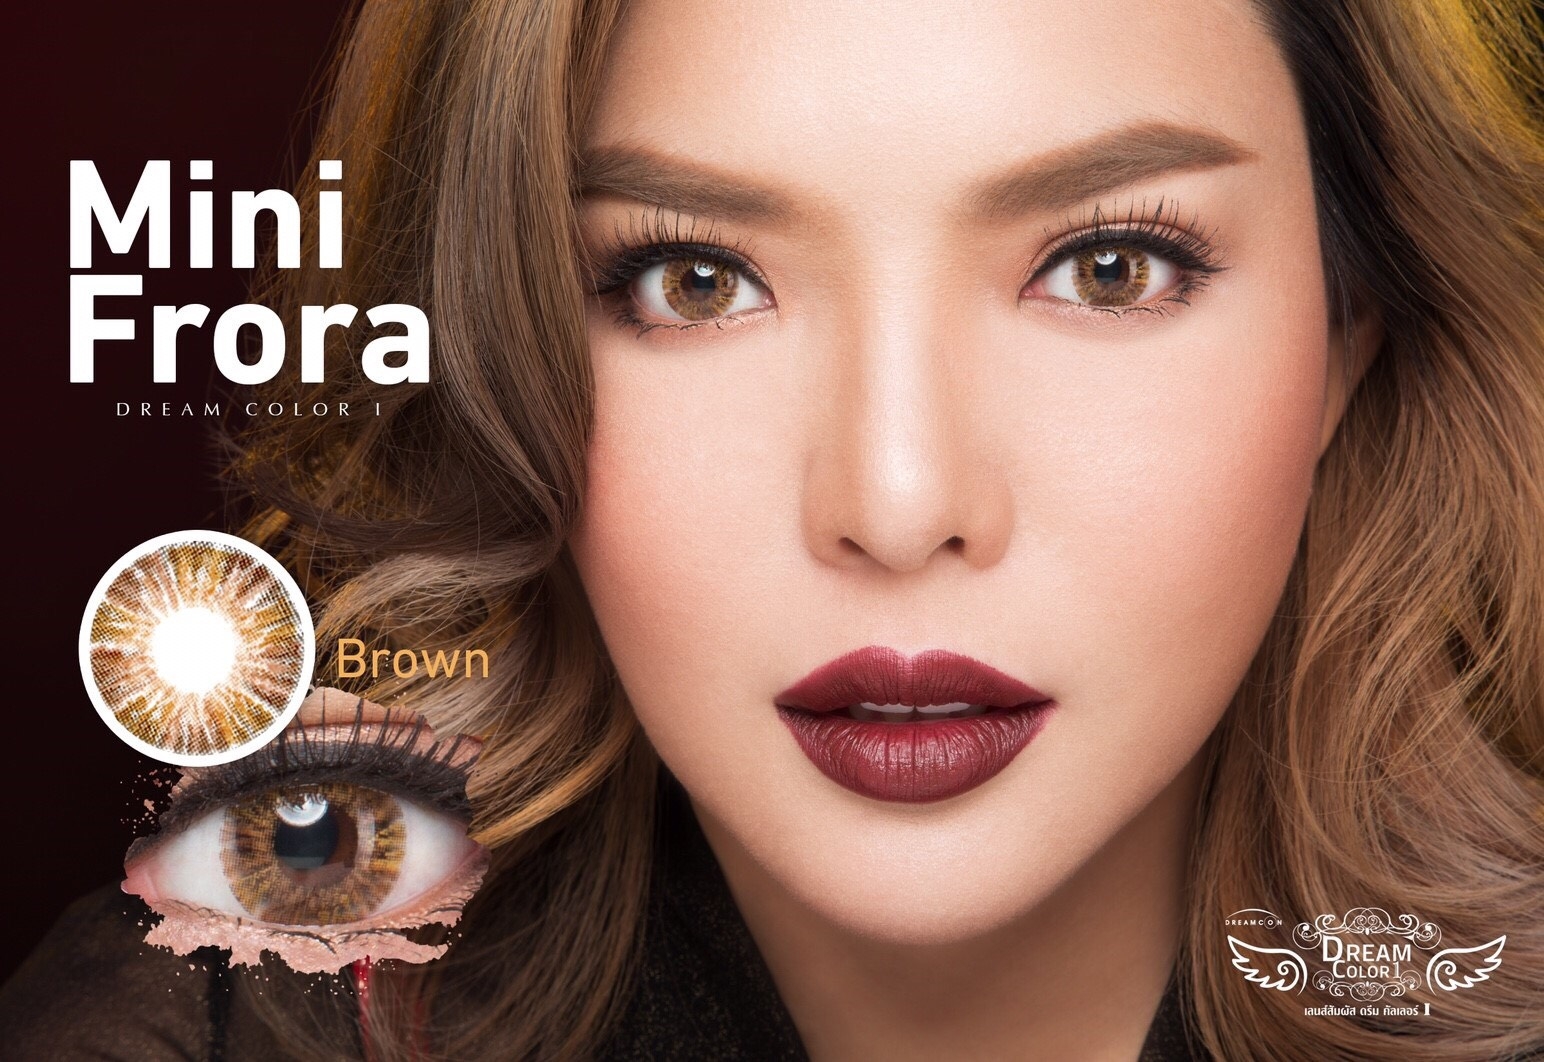 softlens dreamcolor mini frora brown